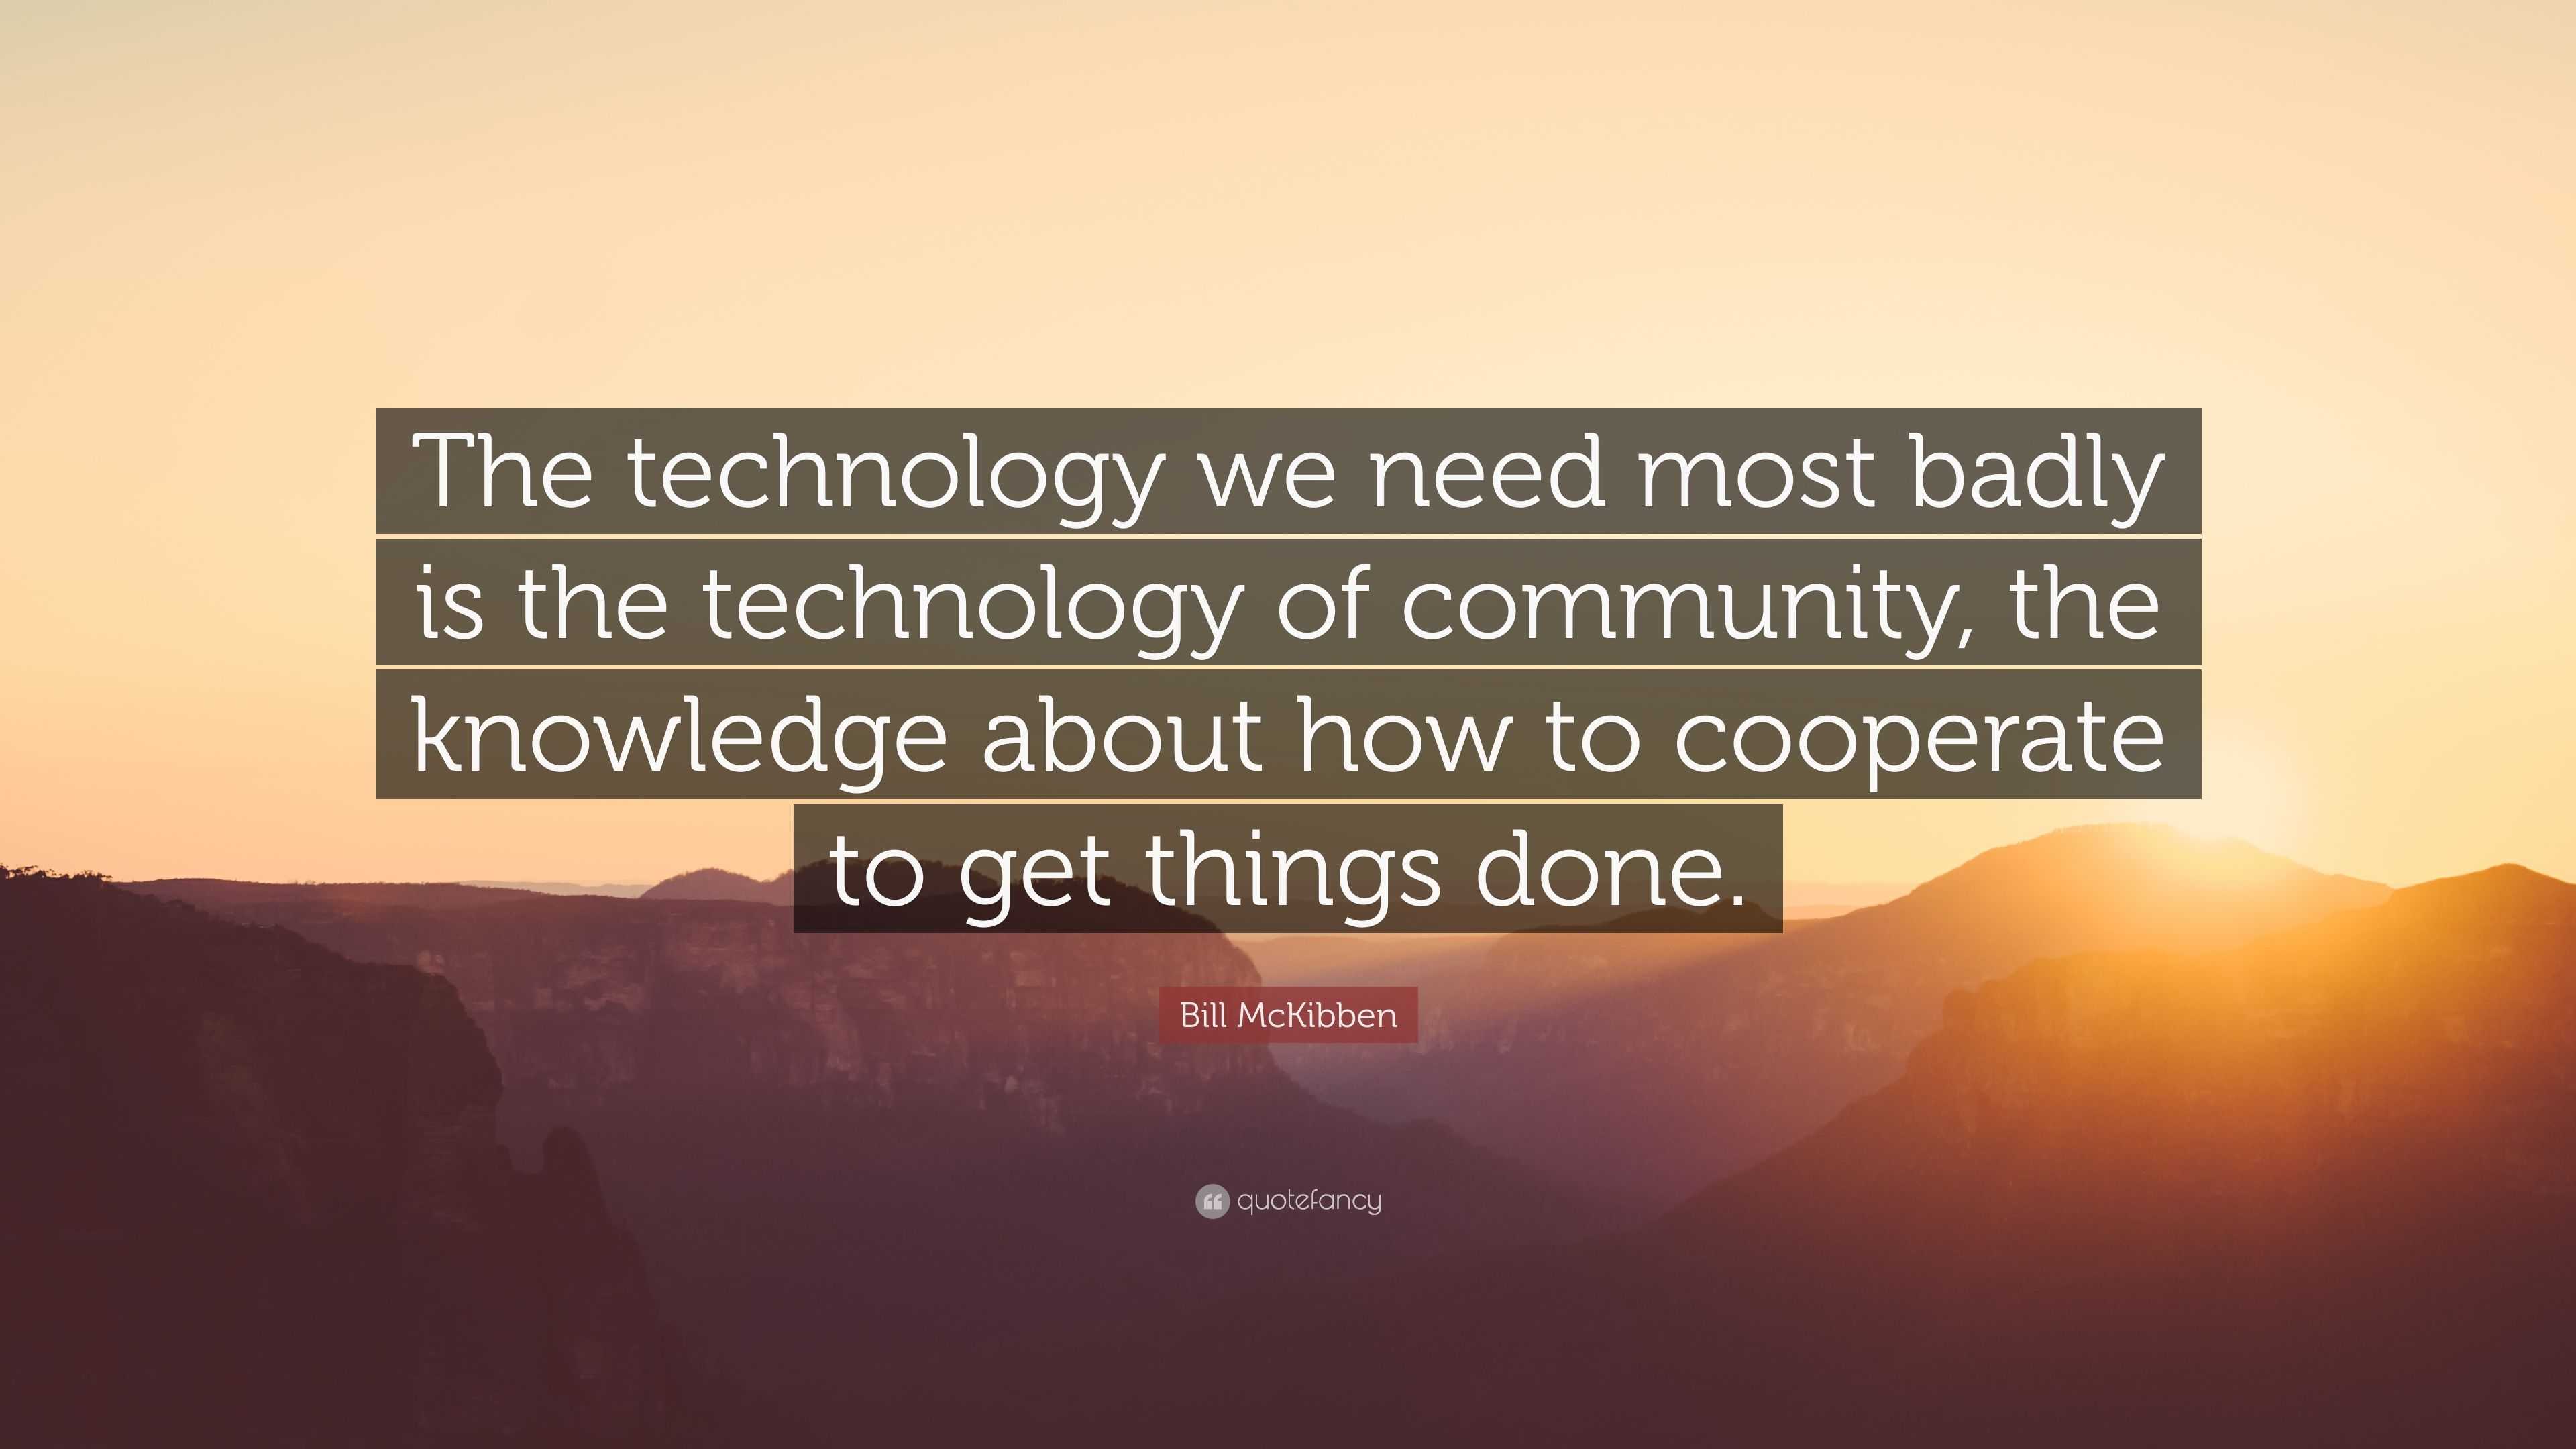 Bill McKibben Quote: “The technology we need most badly is the ...